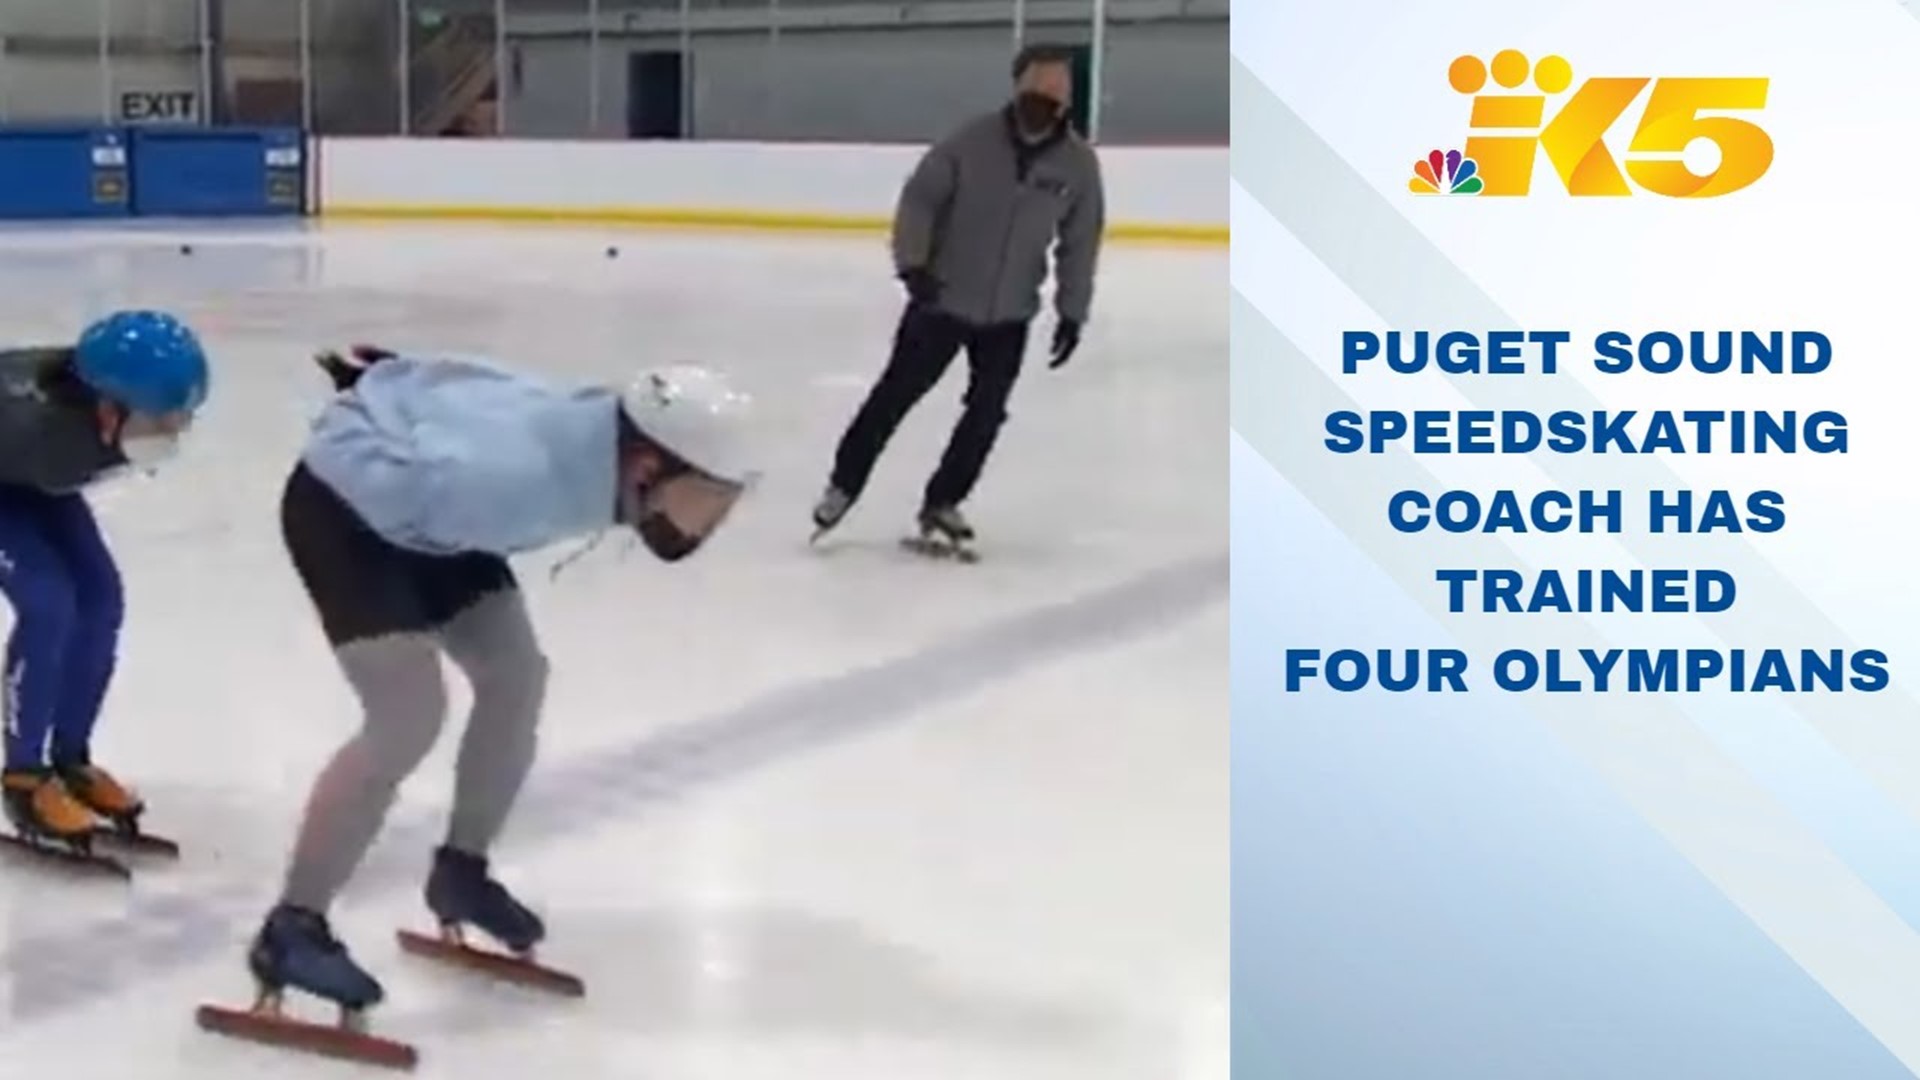 Chang Lee is arguably one of the best speedskating coaches in the U.S. Lee trained Olympians like J.R. Celski, Corie Stoddard and Eunice Lee.